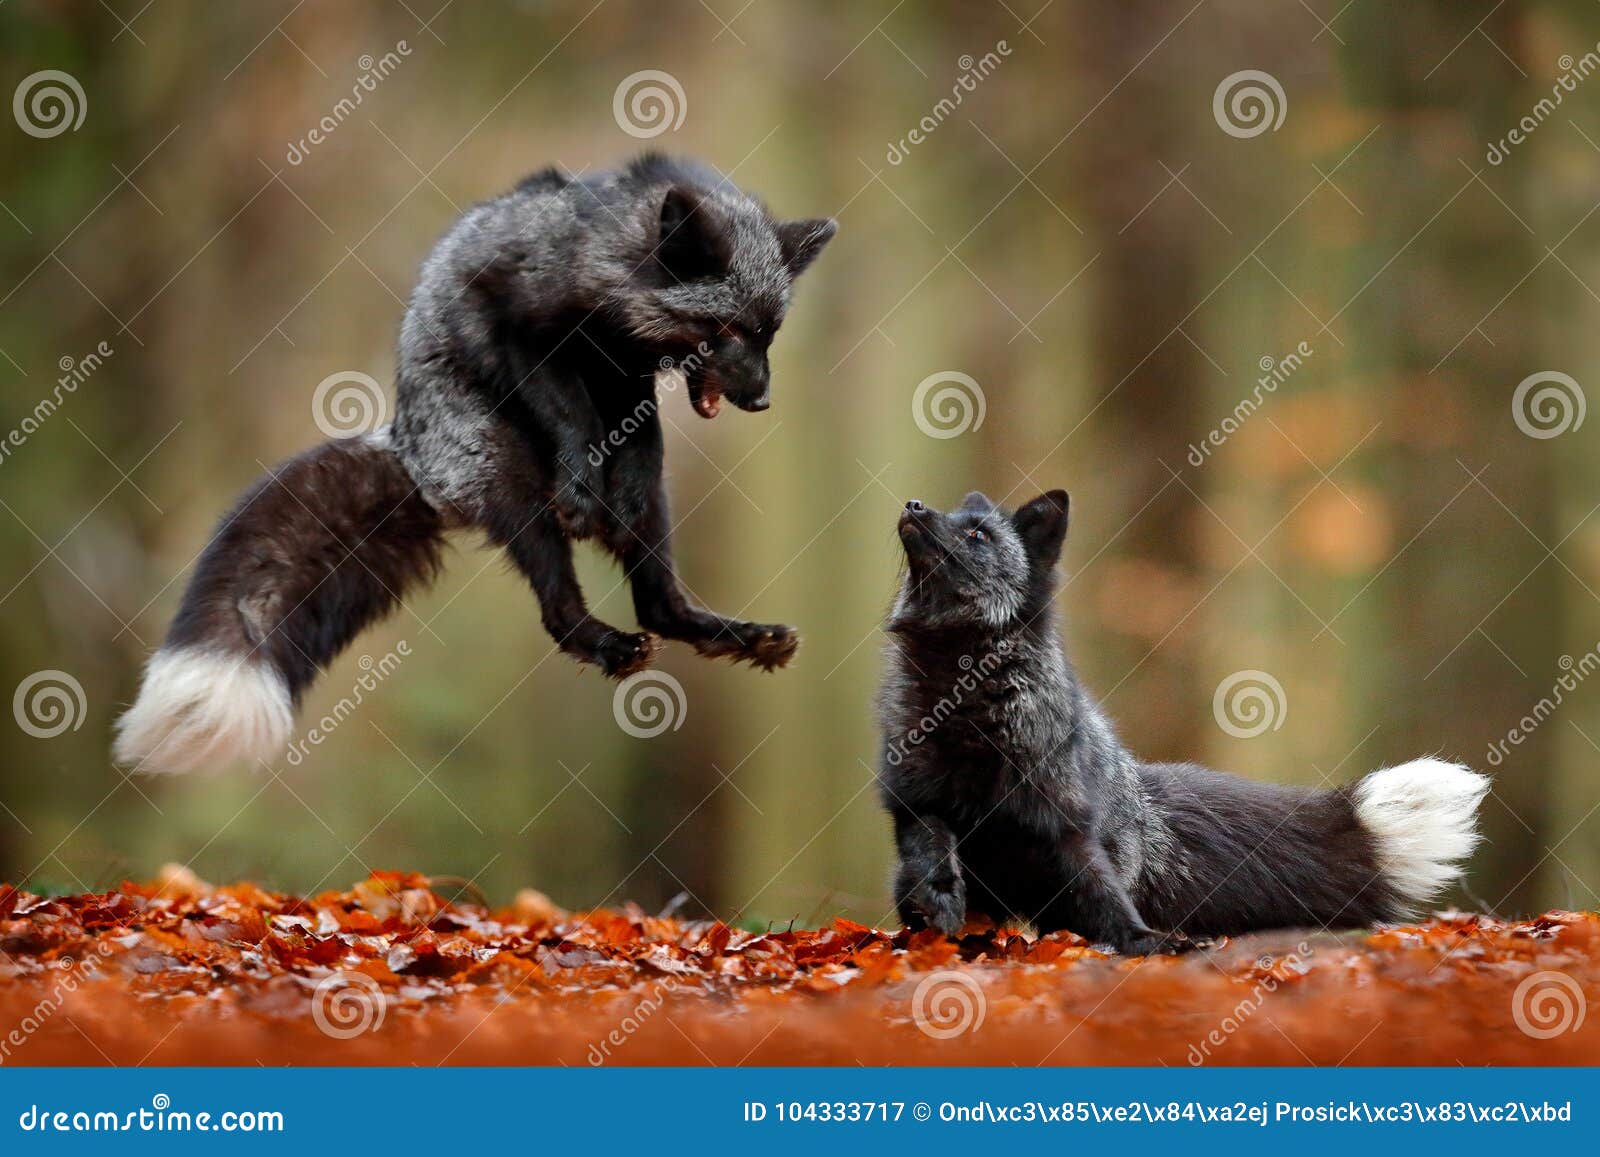 black silver fox. two red fox playing in autumn forest. animal jump in fall wood. wildlife scene from tropic wild nature. pair of